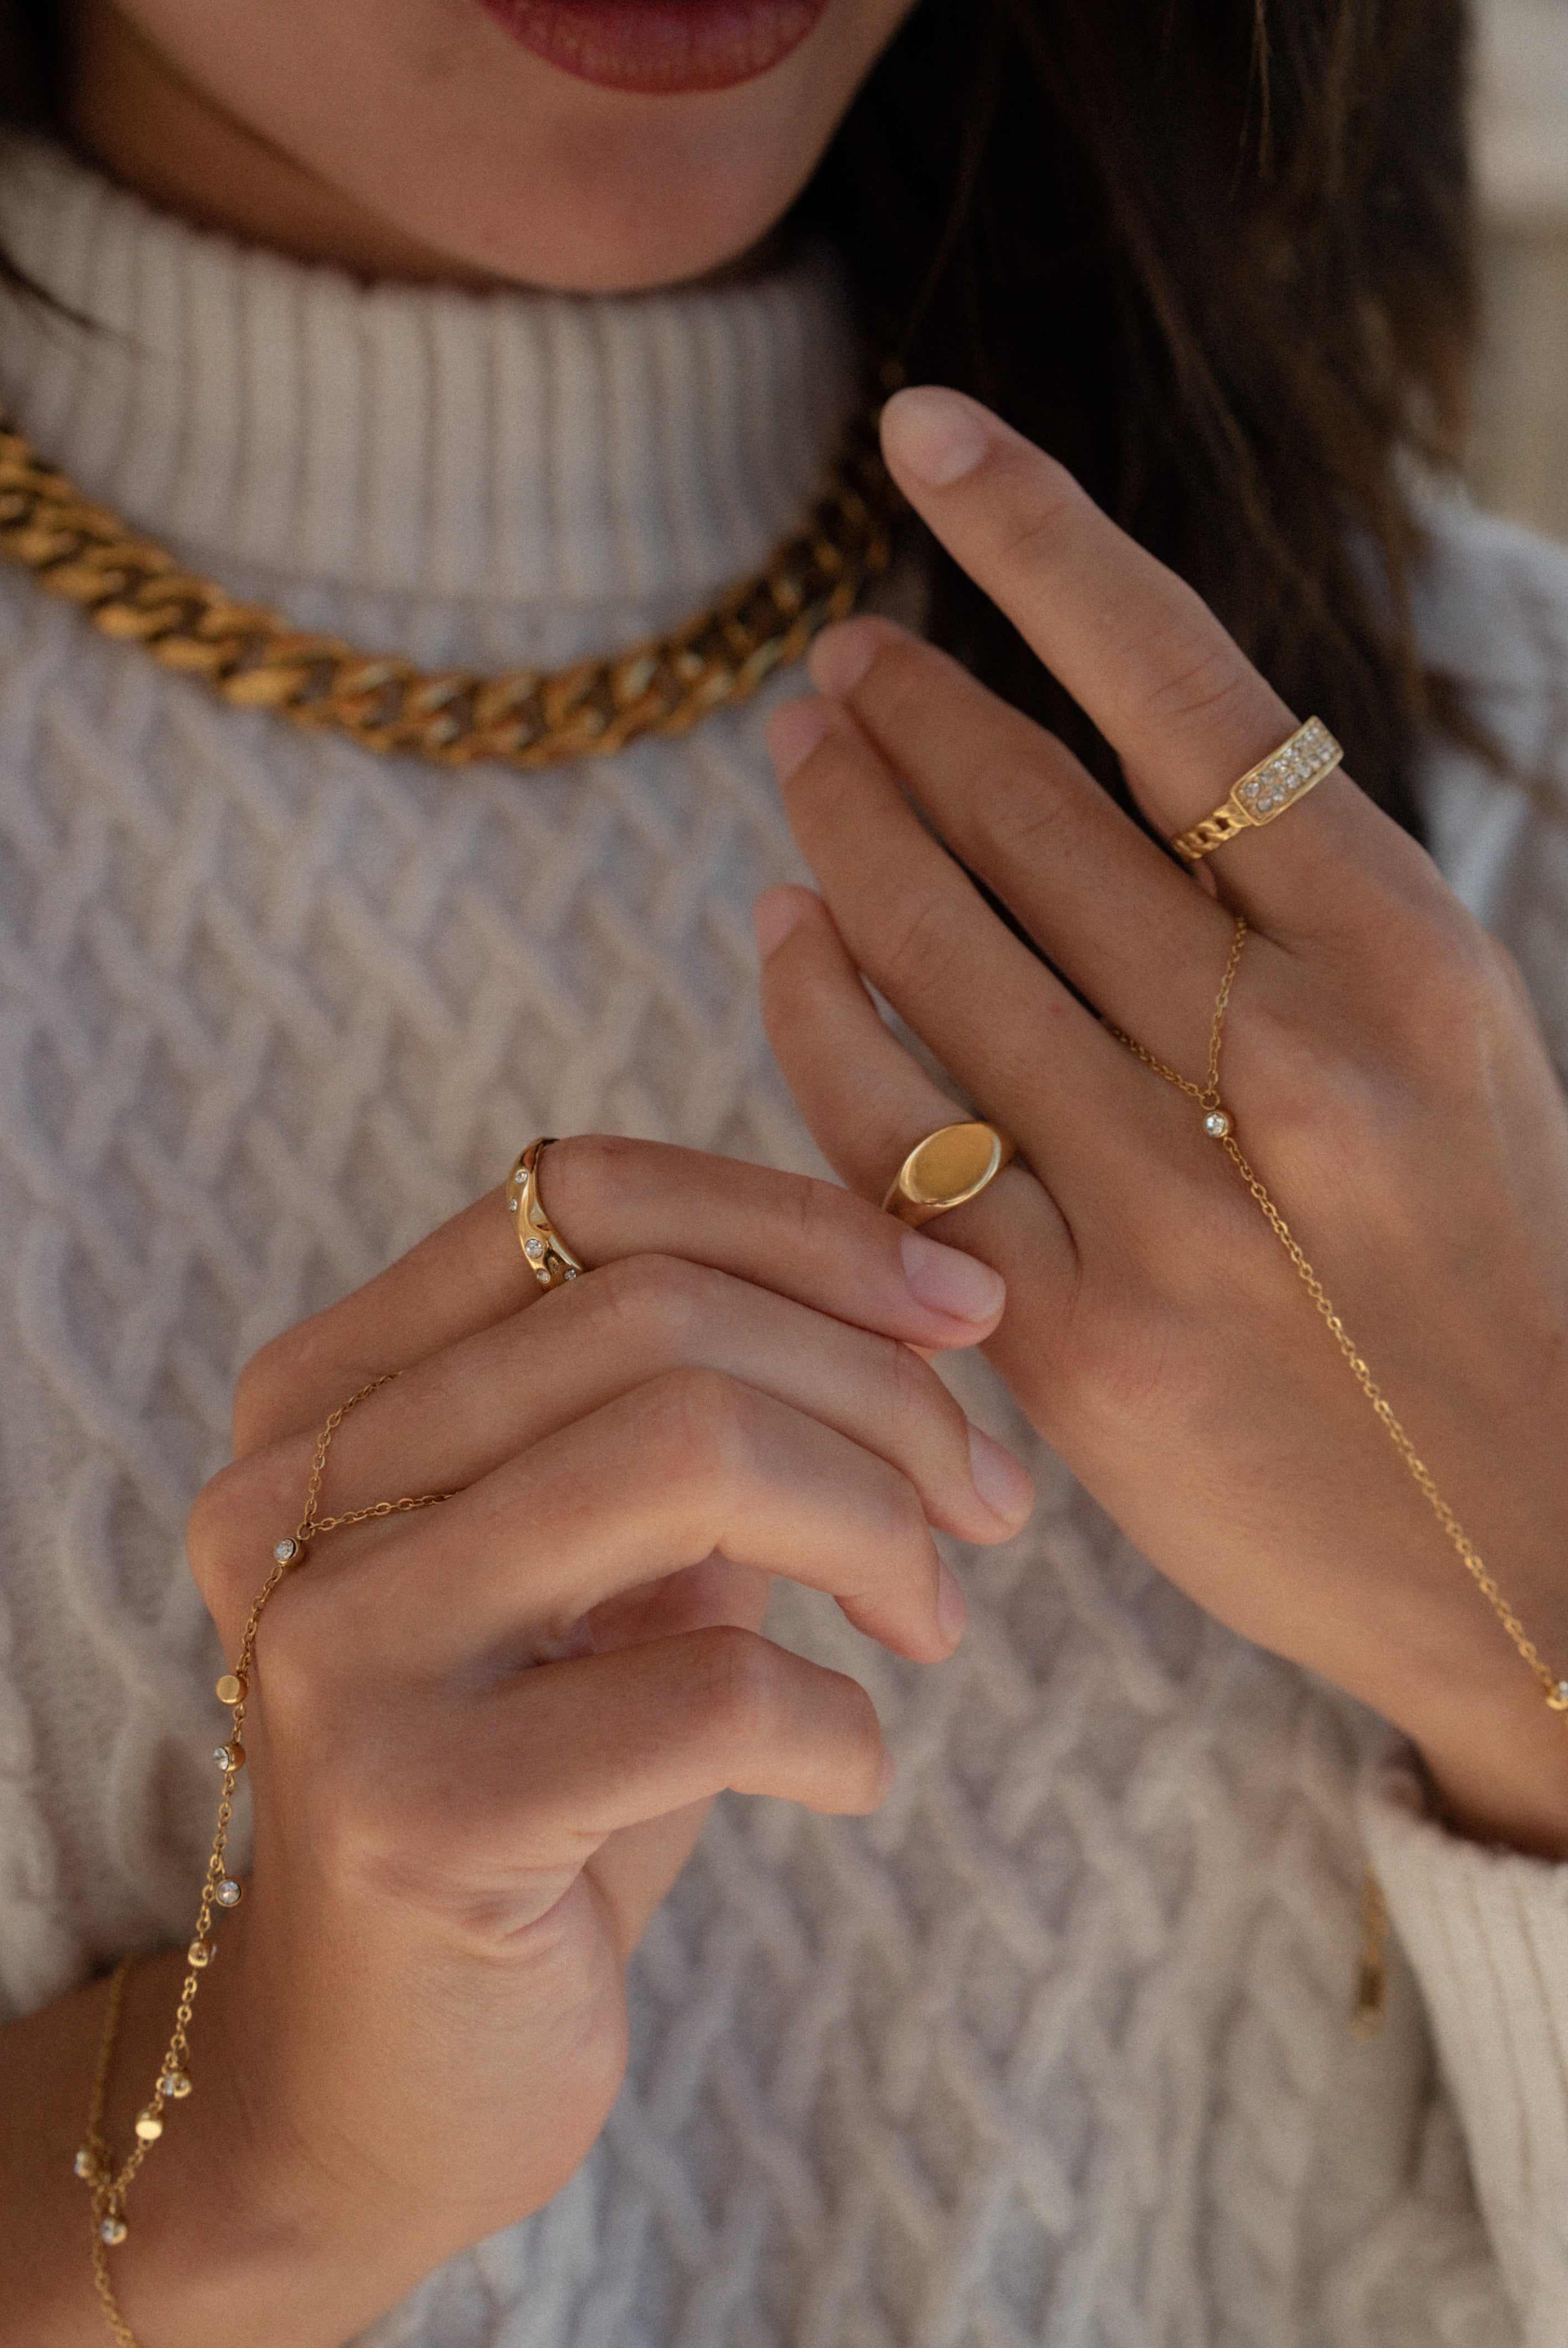 Pinkies need some love, too! Our PRESS PINKY RING is the piece you didn't know you needed. Wear it everyday to add a little something extra to your look.  18k gold plated on stainless steel. Available in size 3, 4, 5, 6, 7, and  8 All the rings come in a beautiful jewelry pouch.